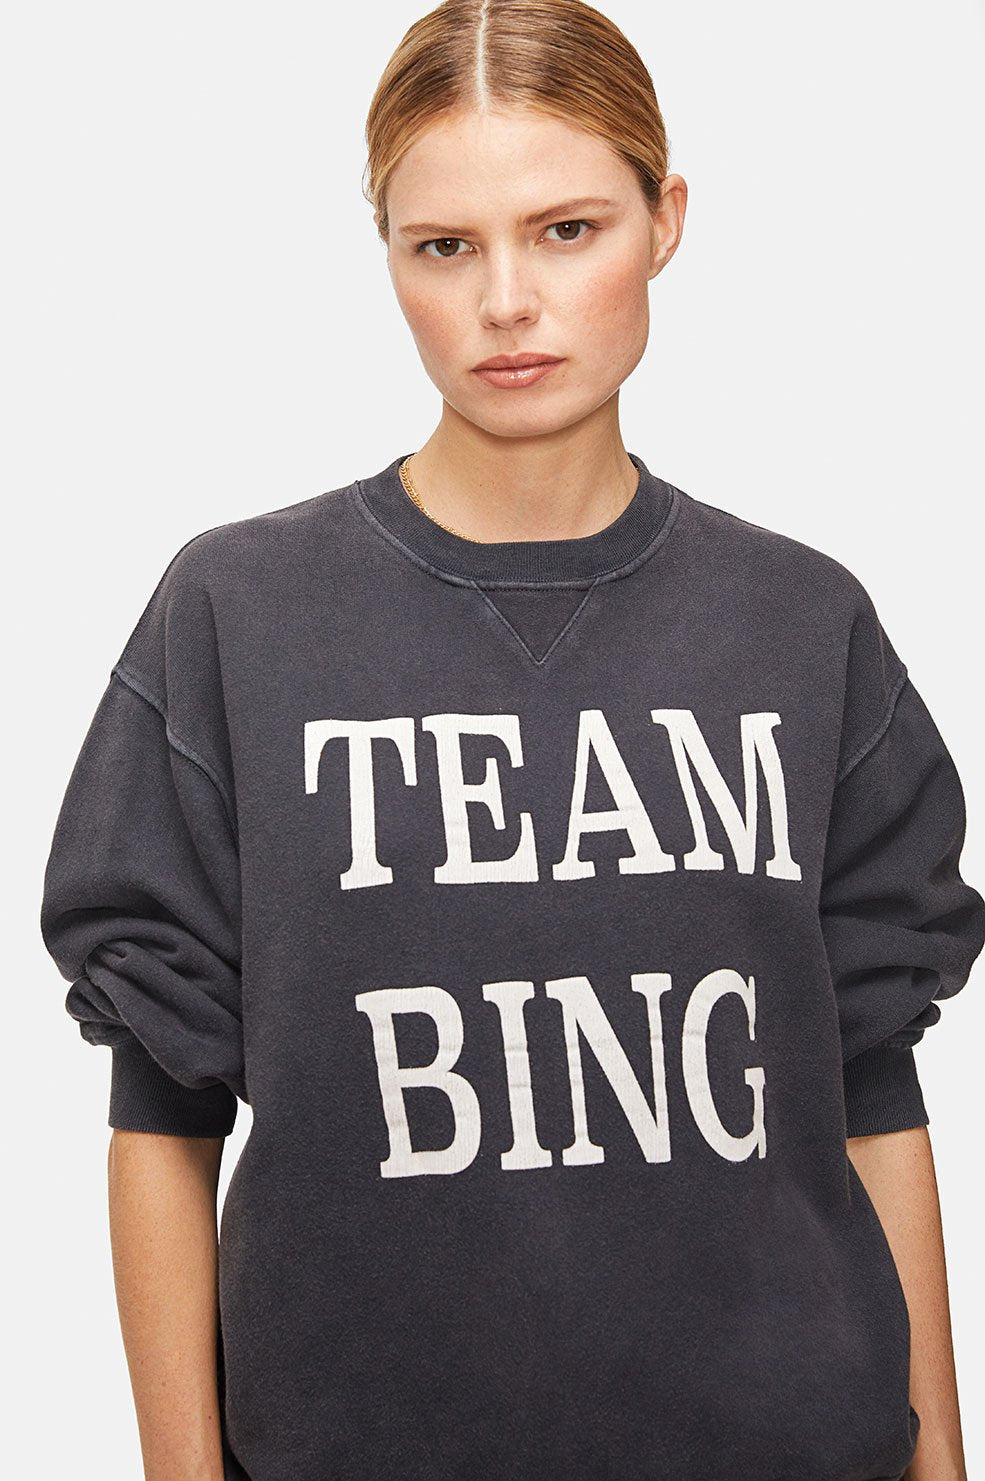 ANINE BING Team Bing Pullover - On Model Front